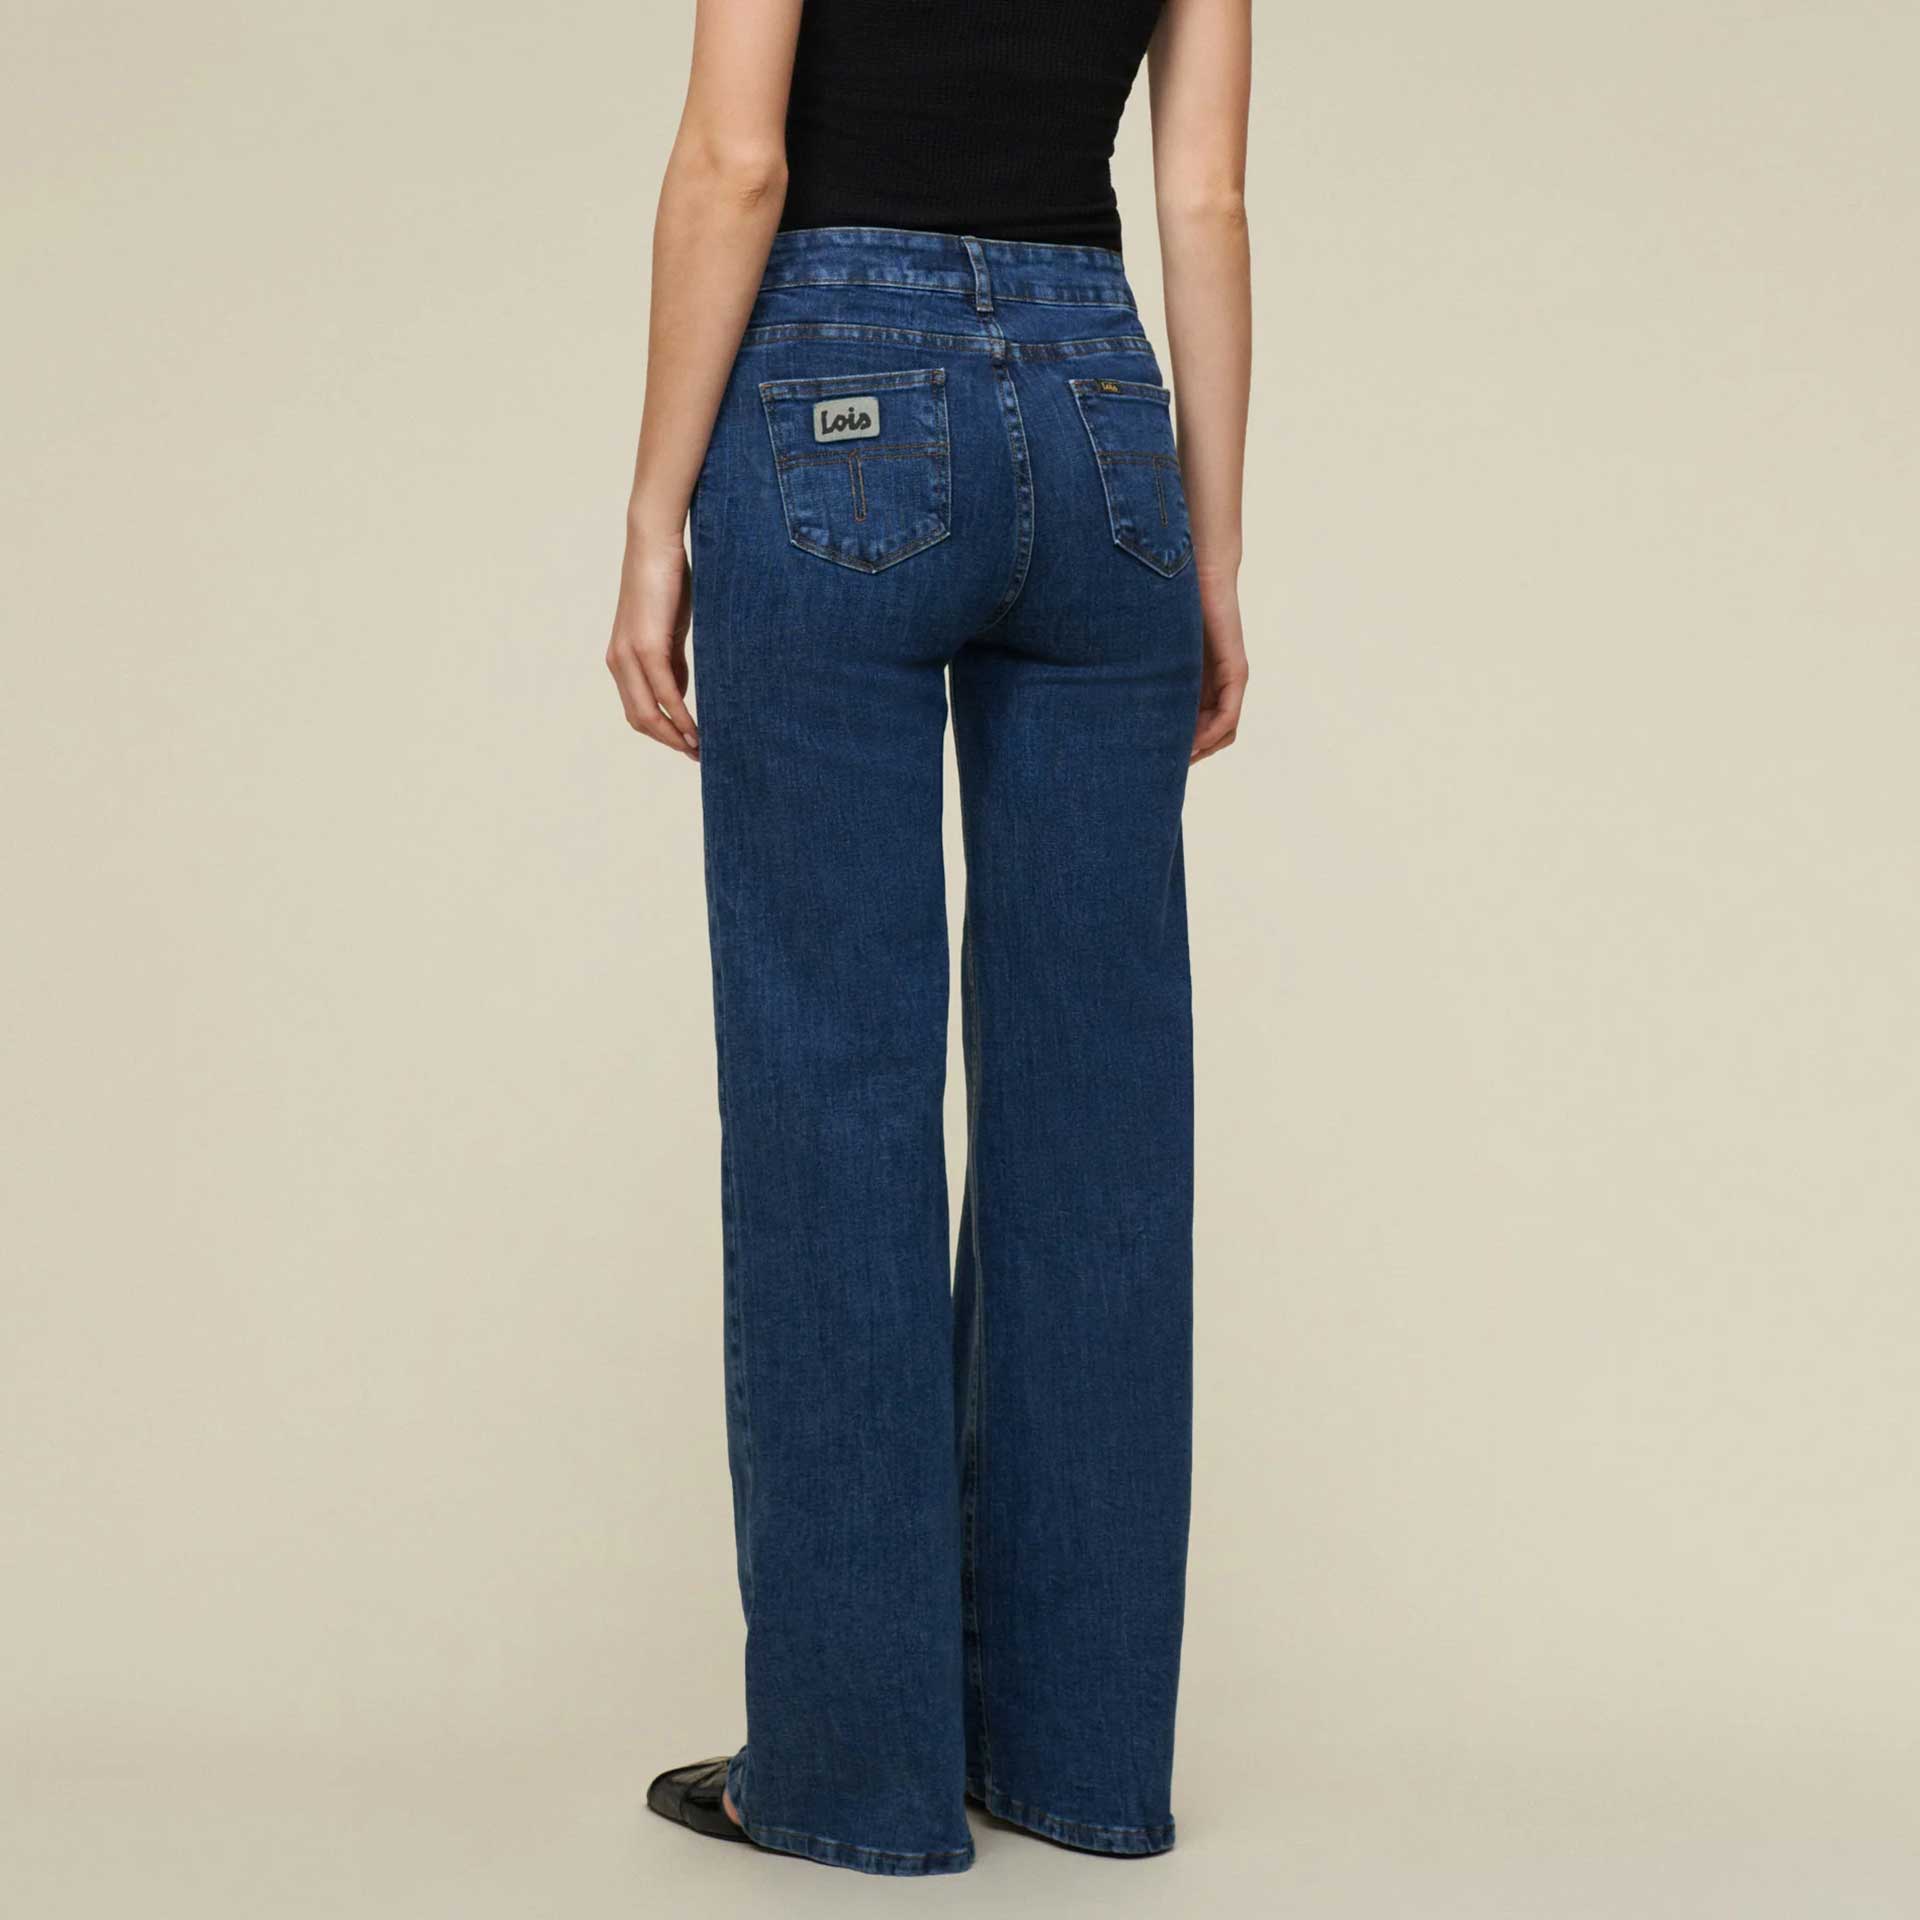 Lois jeans Jeans Palazzo 2